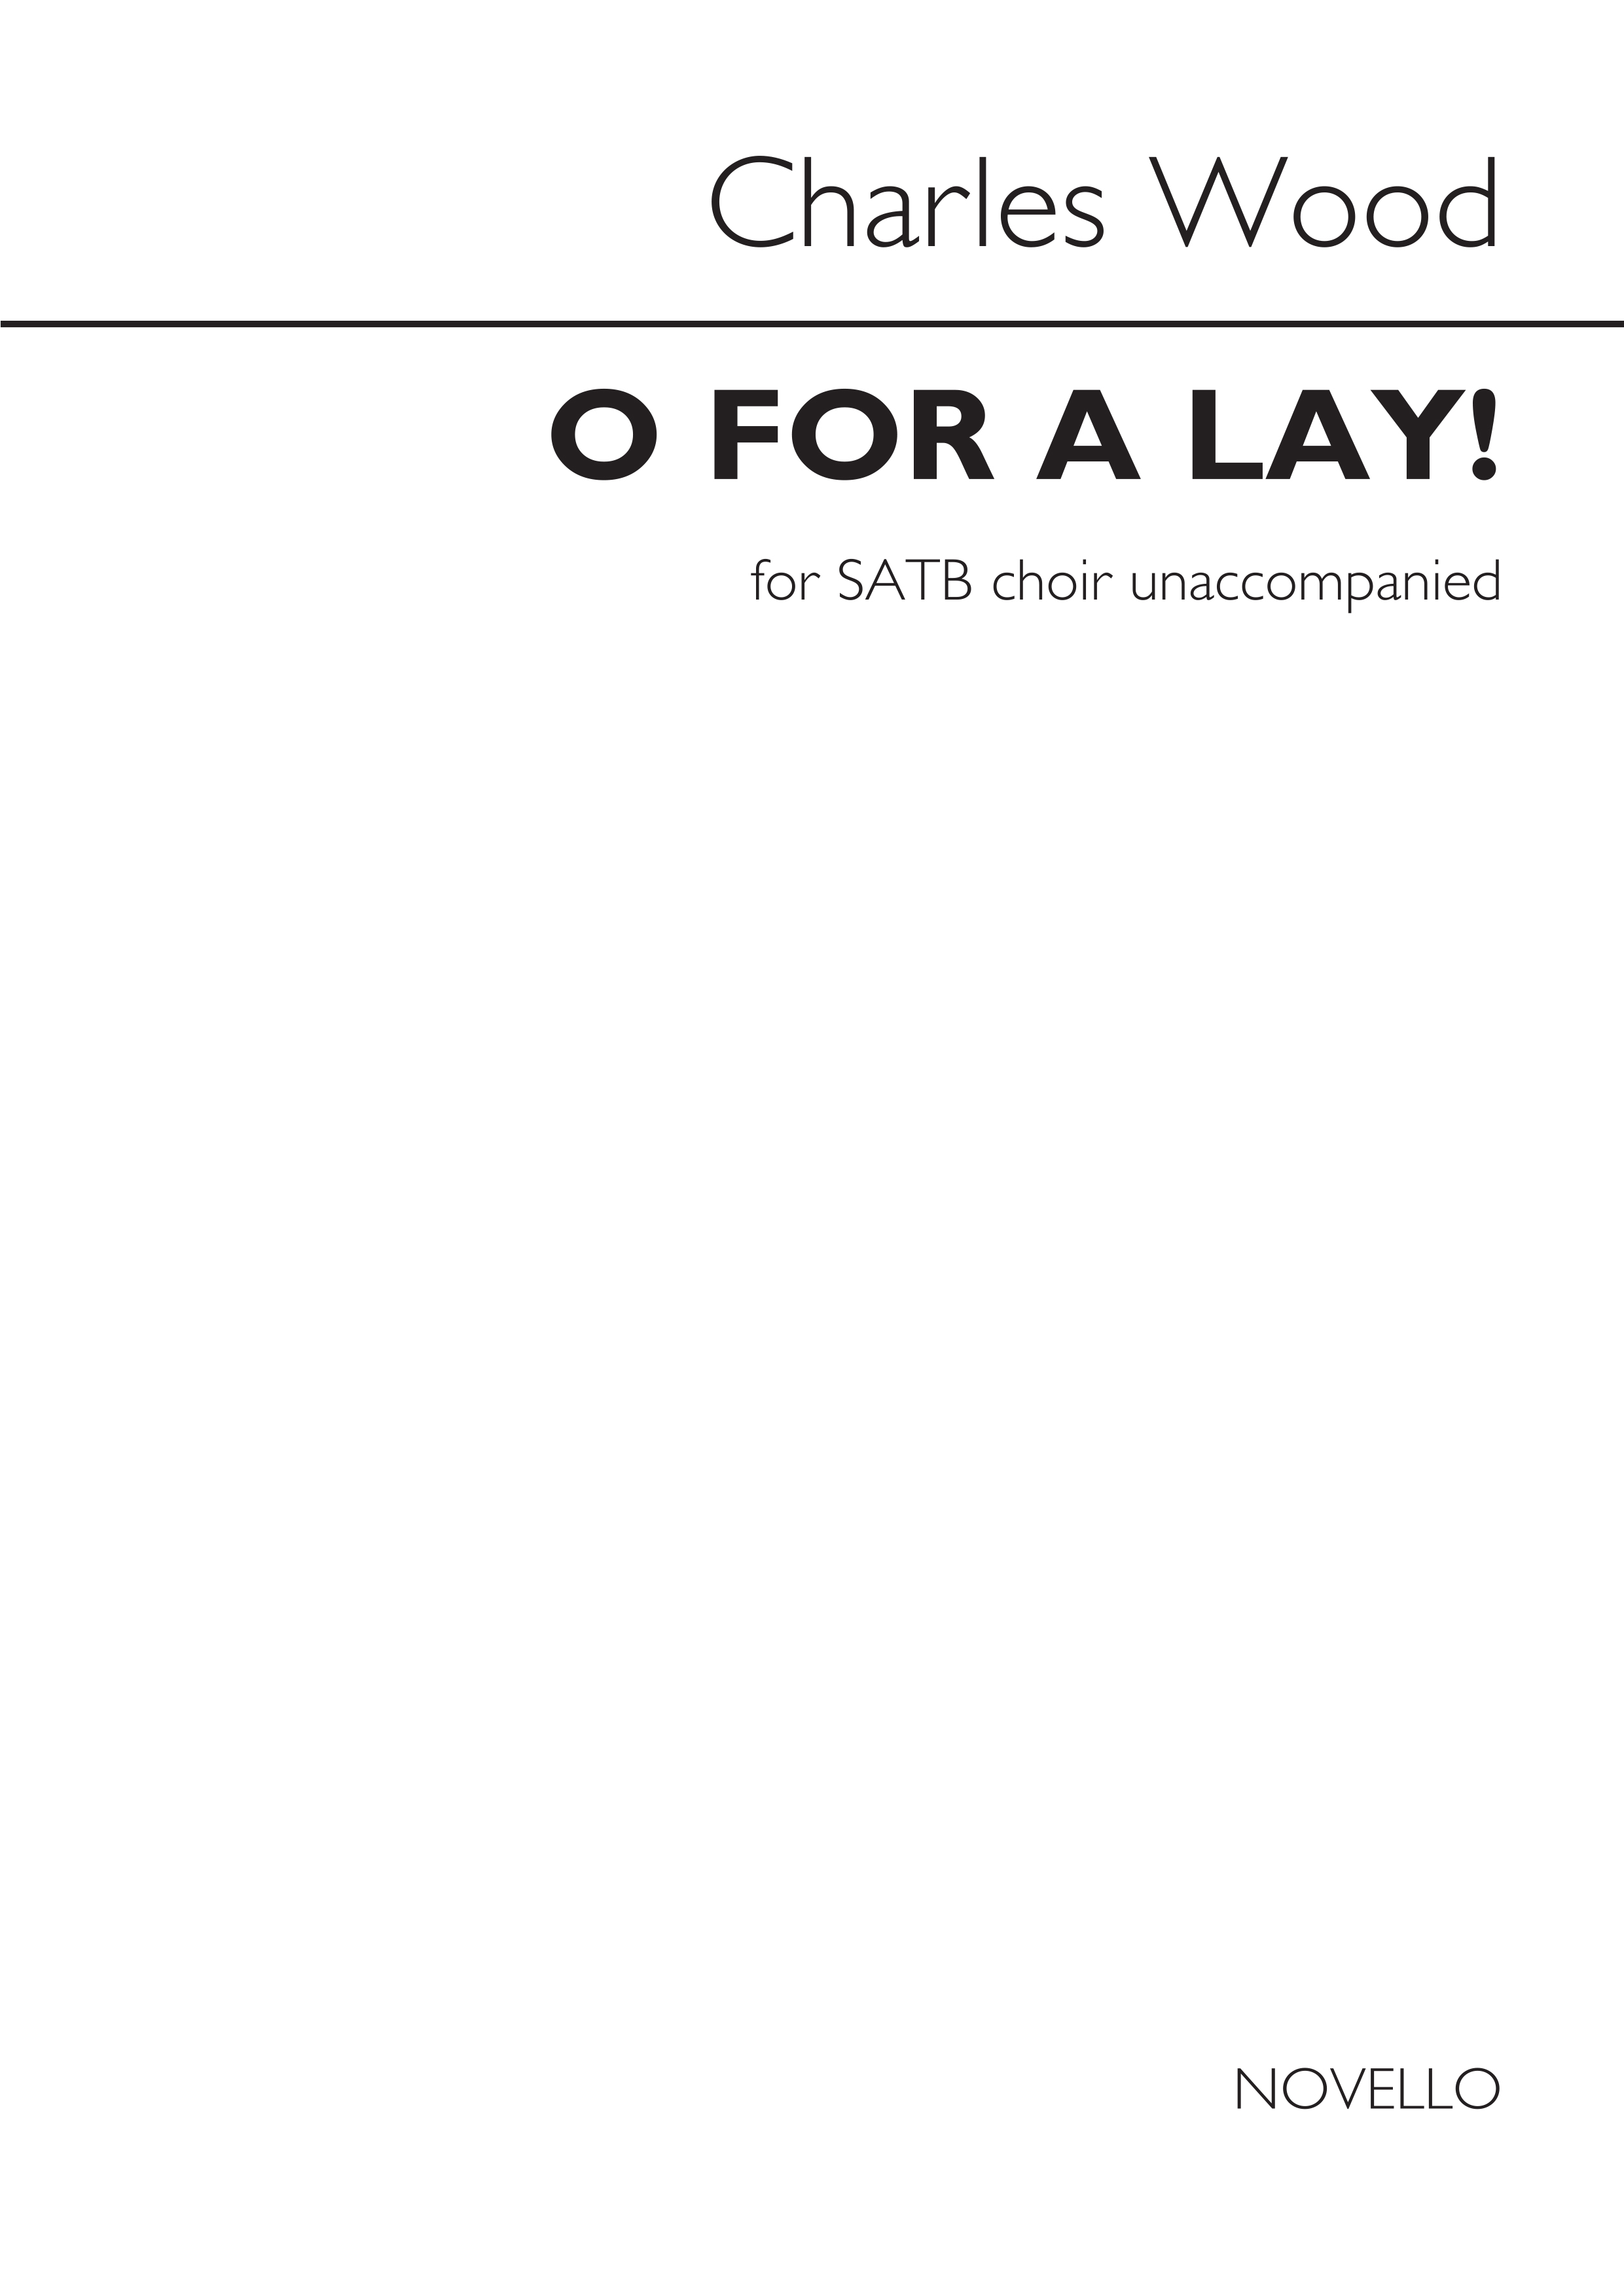 Charles Wood: Charles Wood: O For A Lay!: SATB: Vocal Score